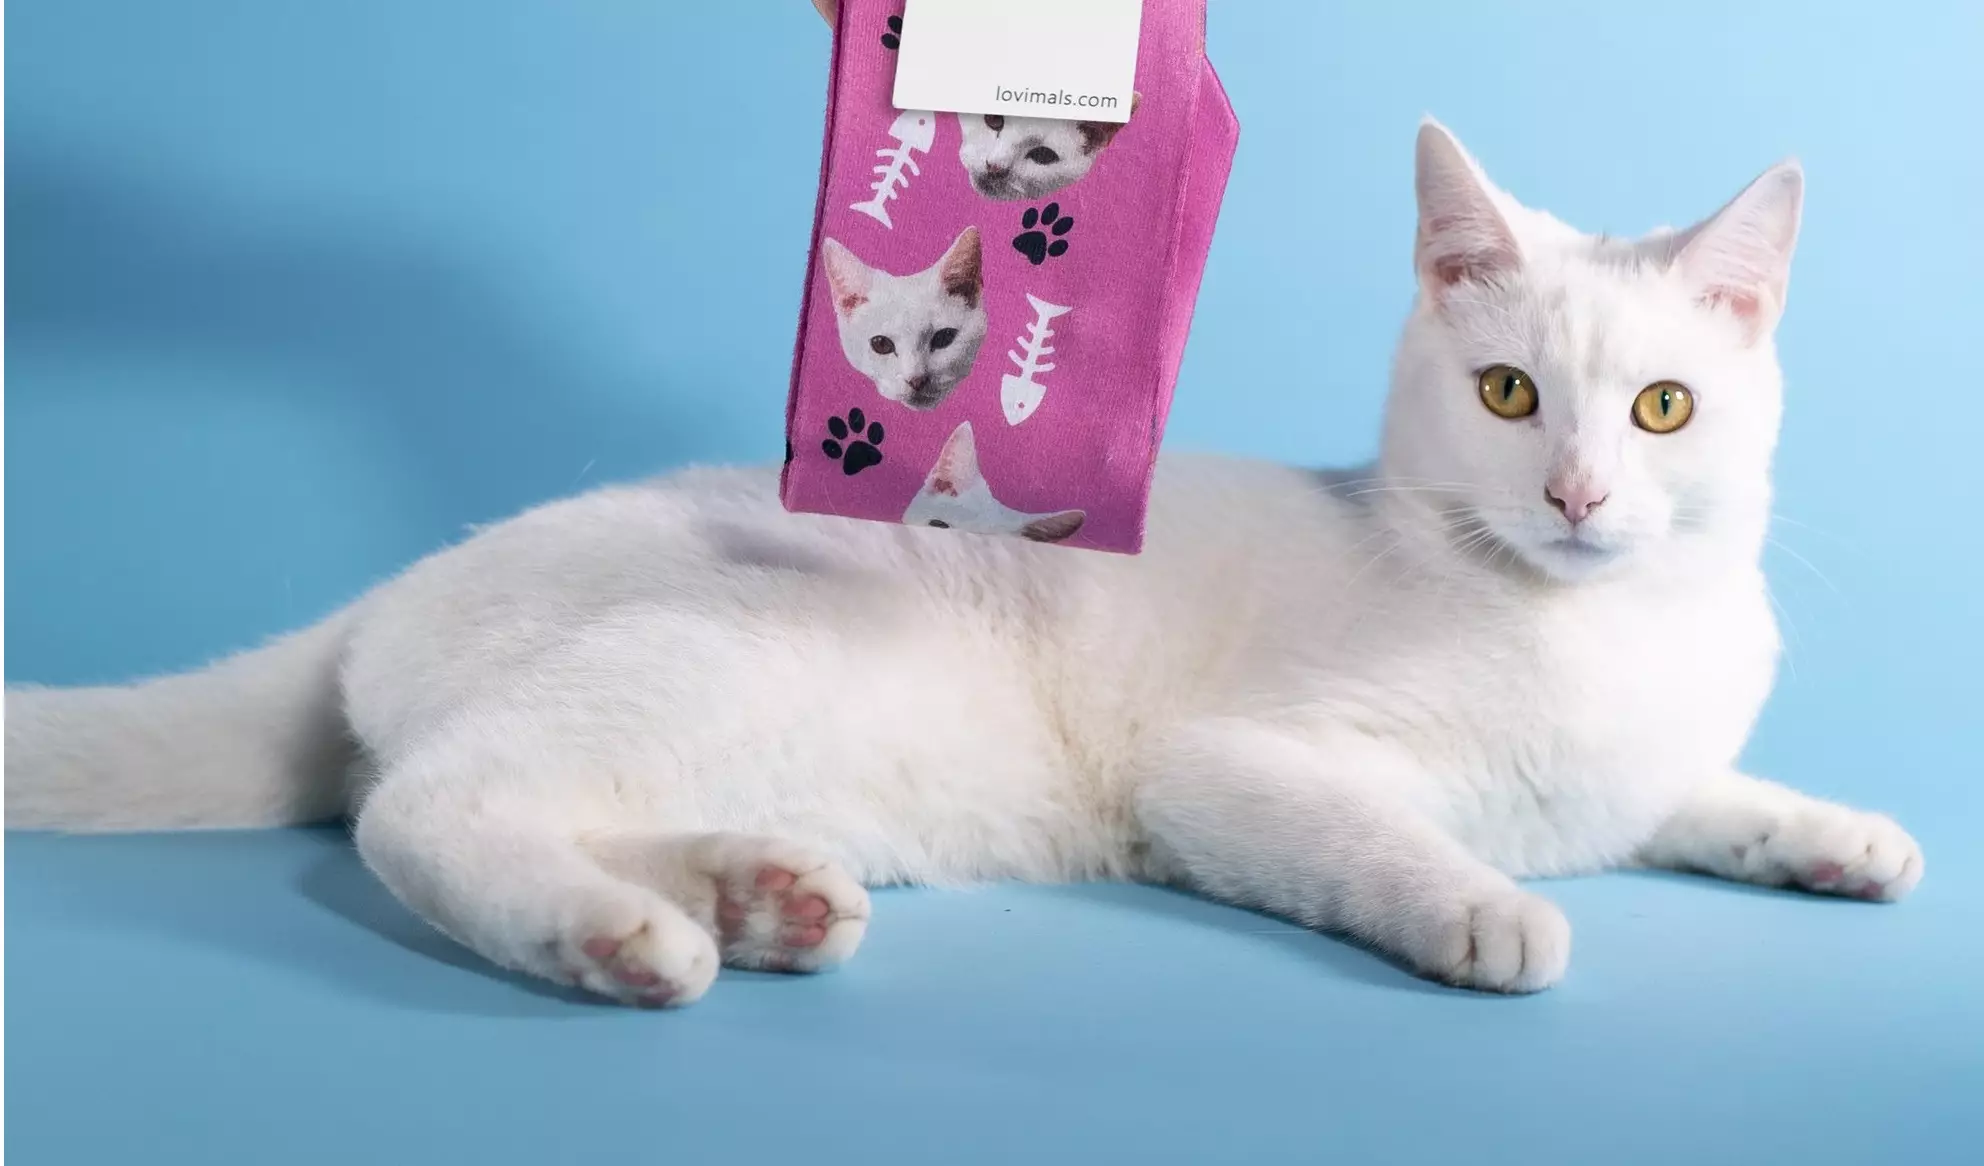 You can now immortalise your pet in sock form (